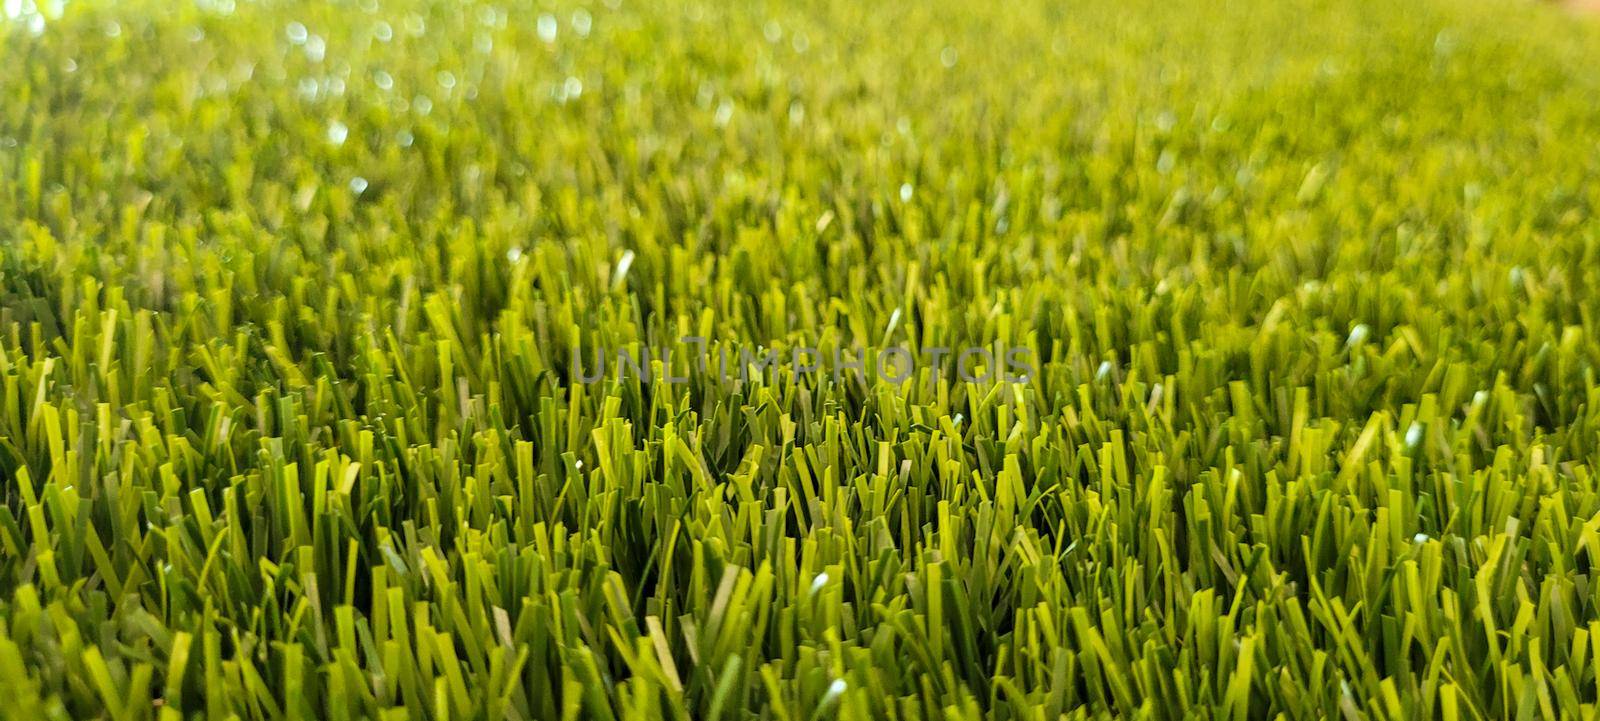 green lawn image that can be used as a natural background with cobblestones